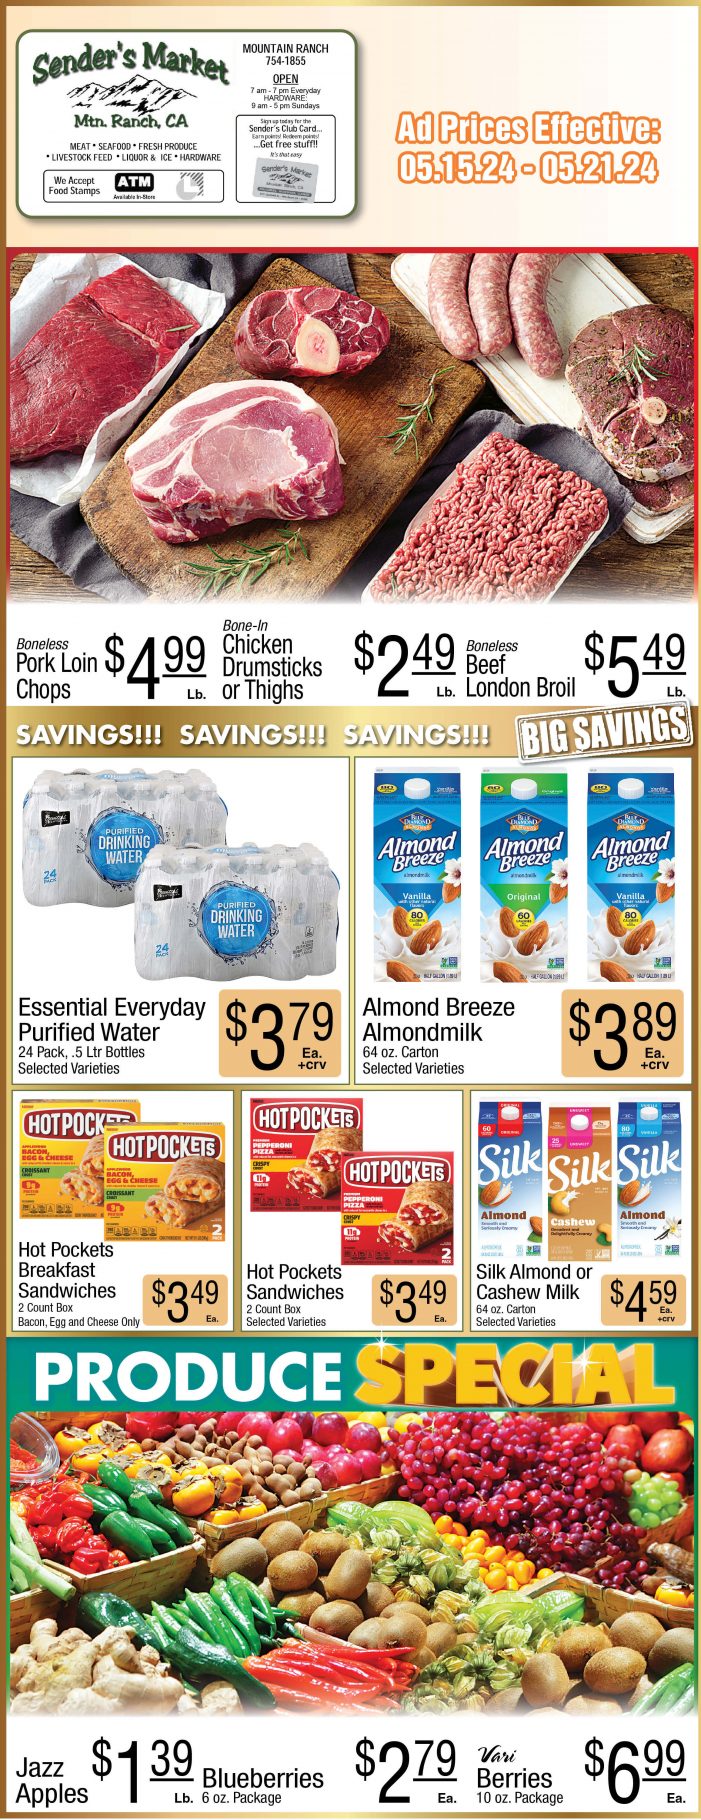 Sender’s Market Weekly Ad & Grocery Specials Through May 21! Shop Local & Save!!